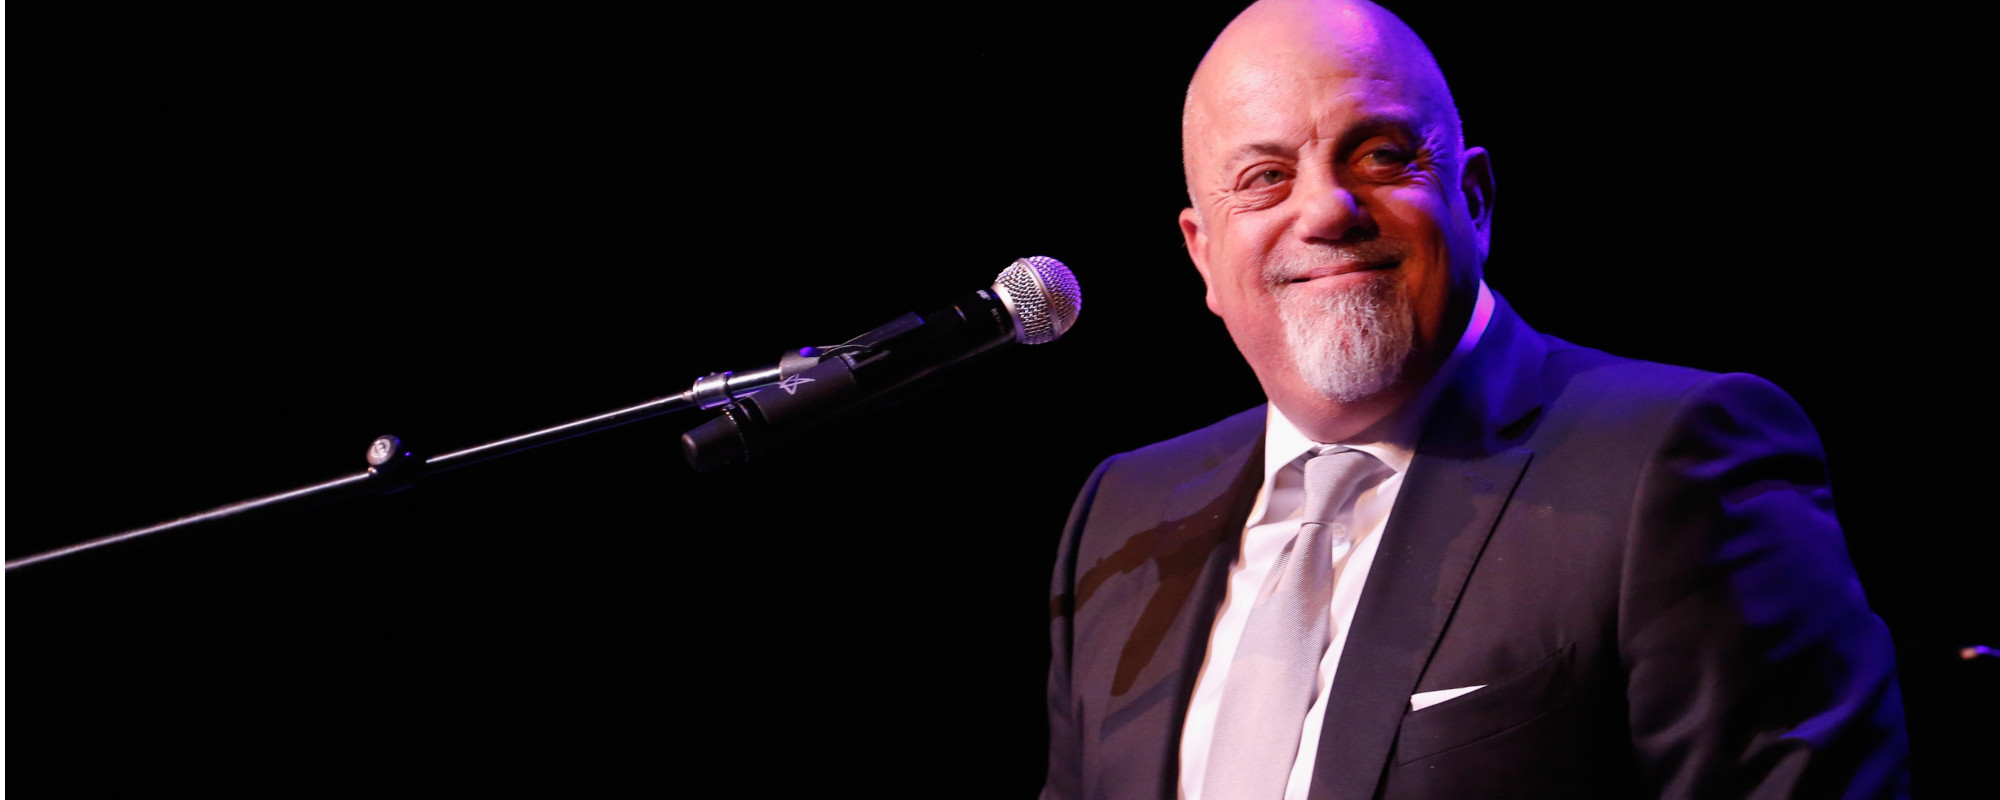 Billy Joel Teases First New Music in 17 Years: “Did I Wait Too Long?”